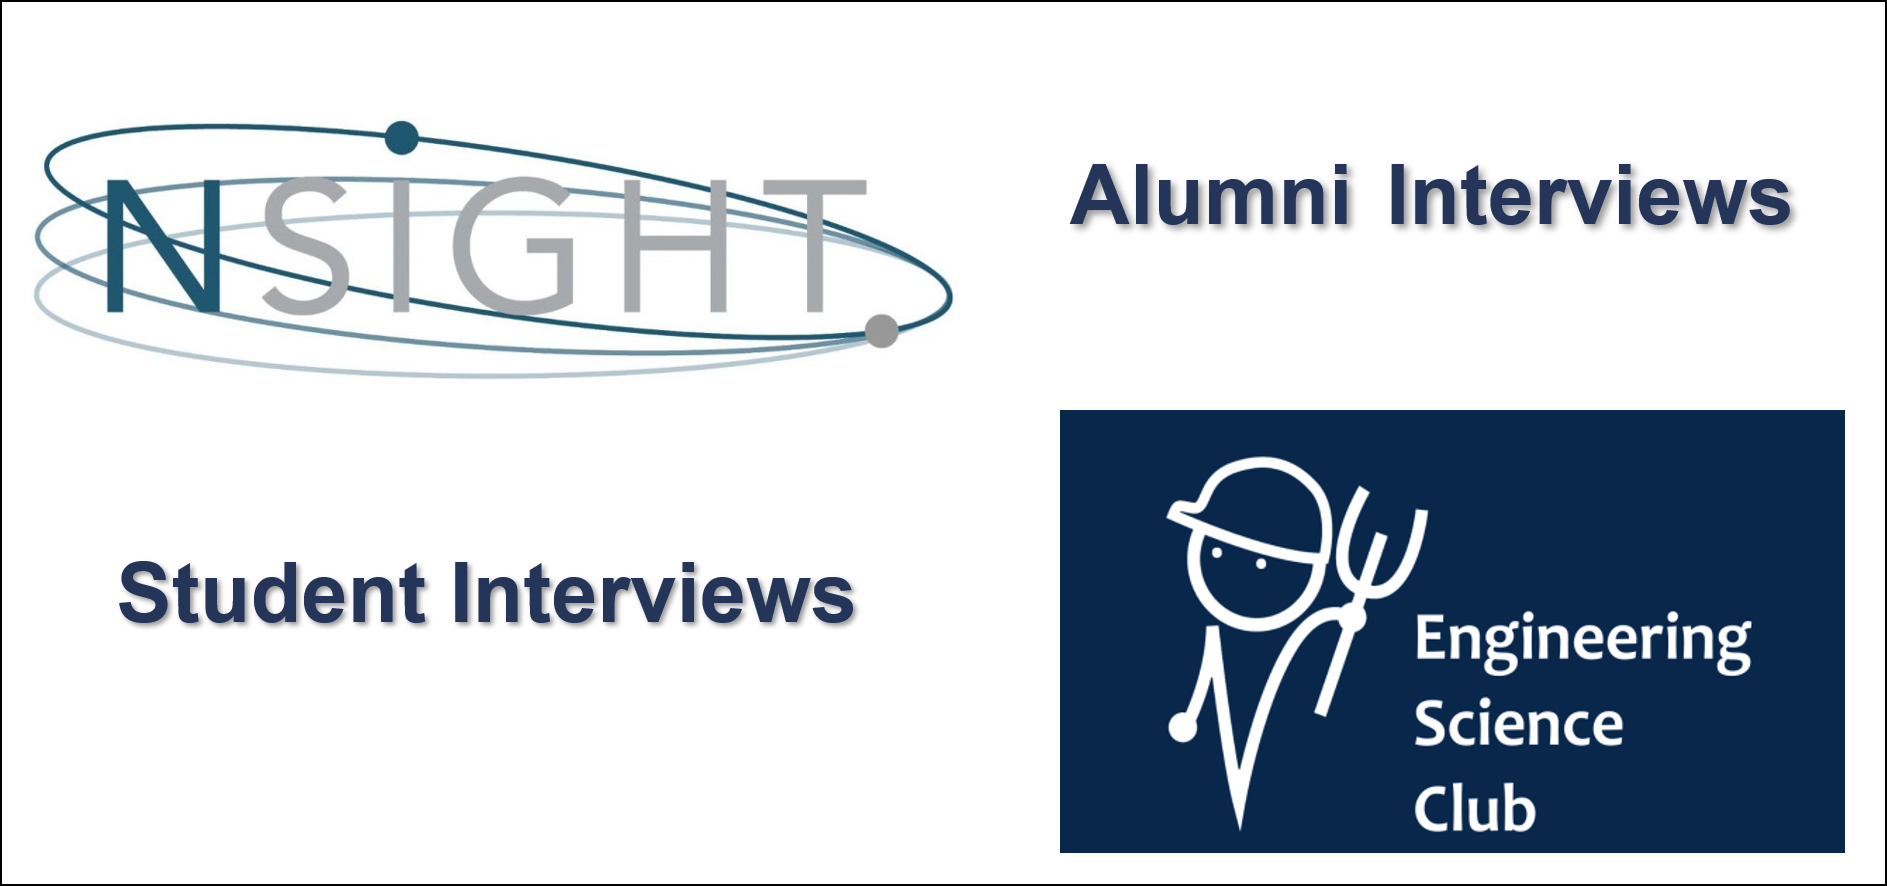 images of the NSight and Engineering Science Club logos, and the text “Alumni Interviews, and “Student Interviews”